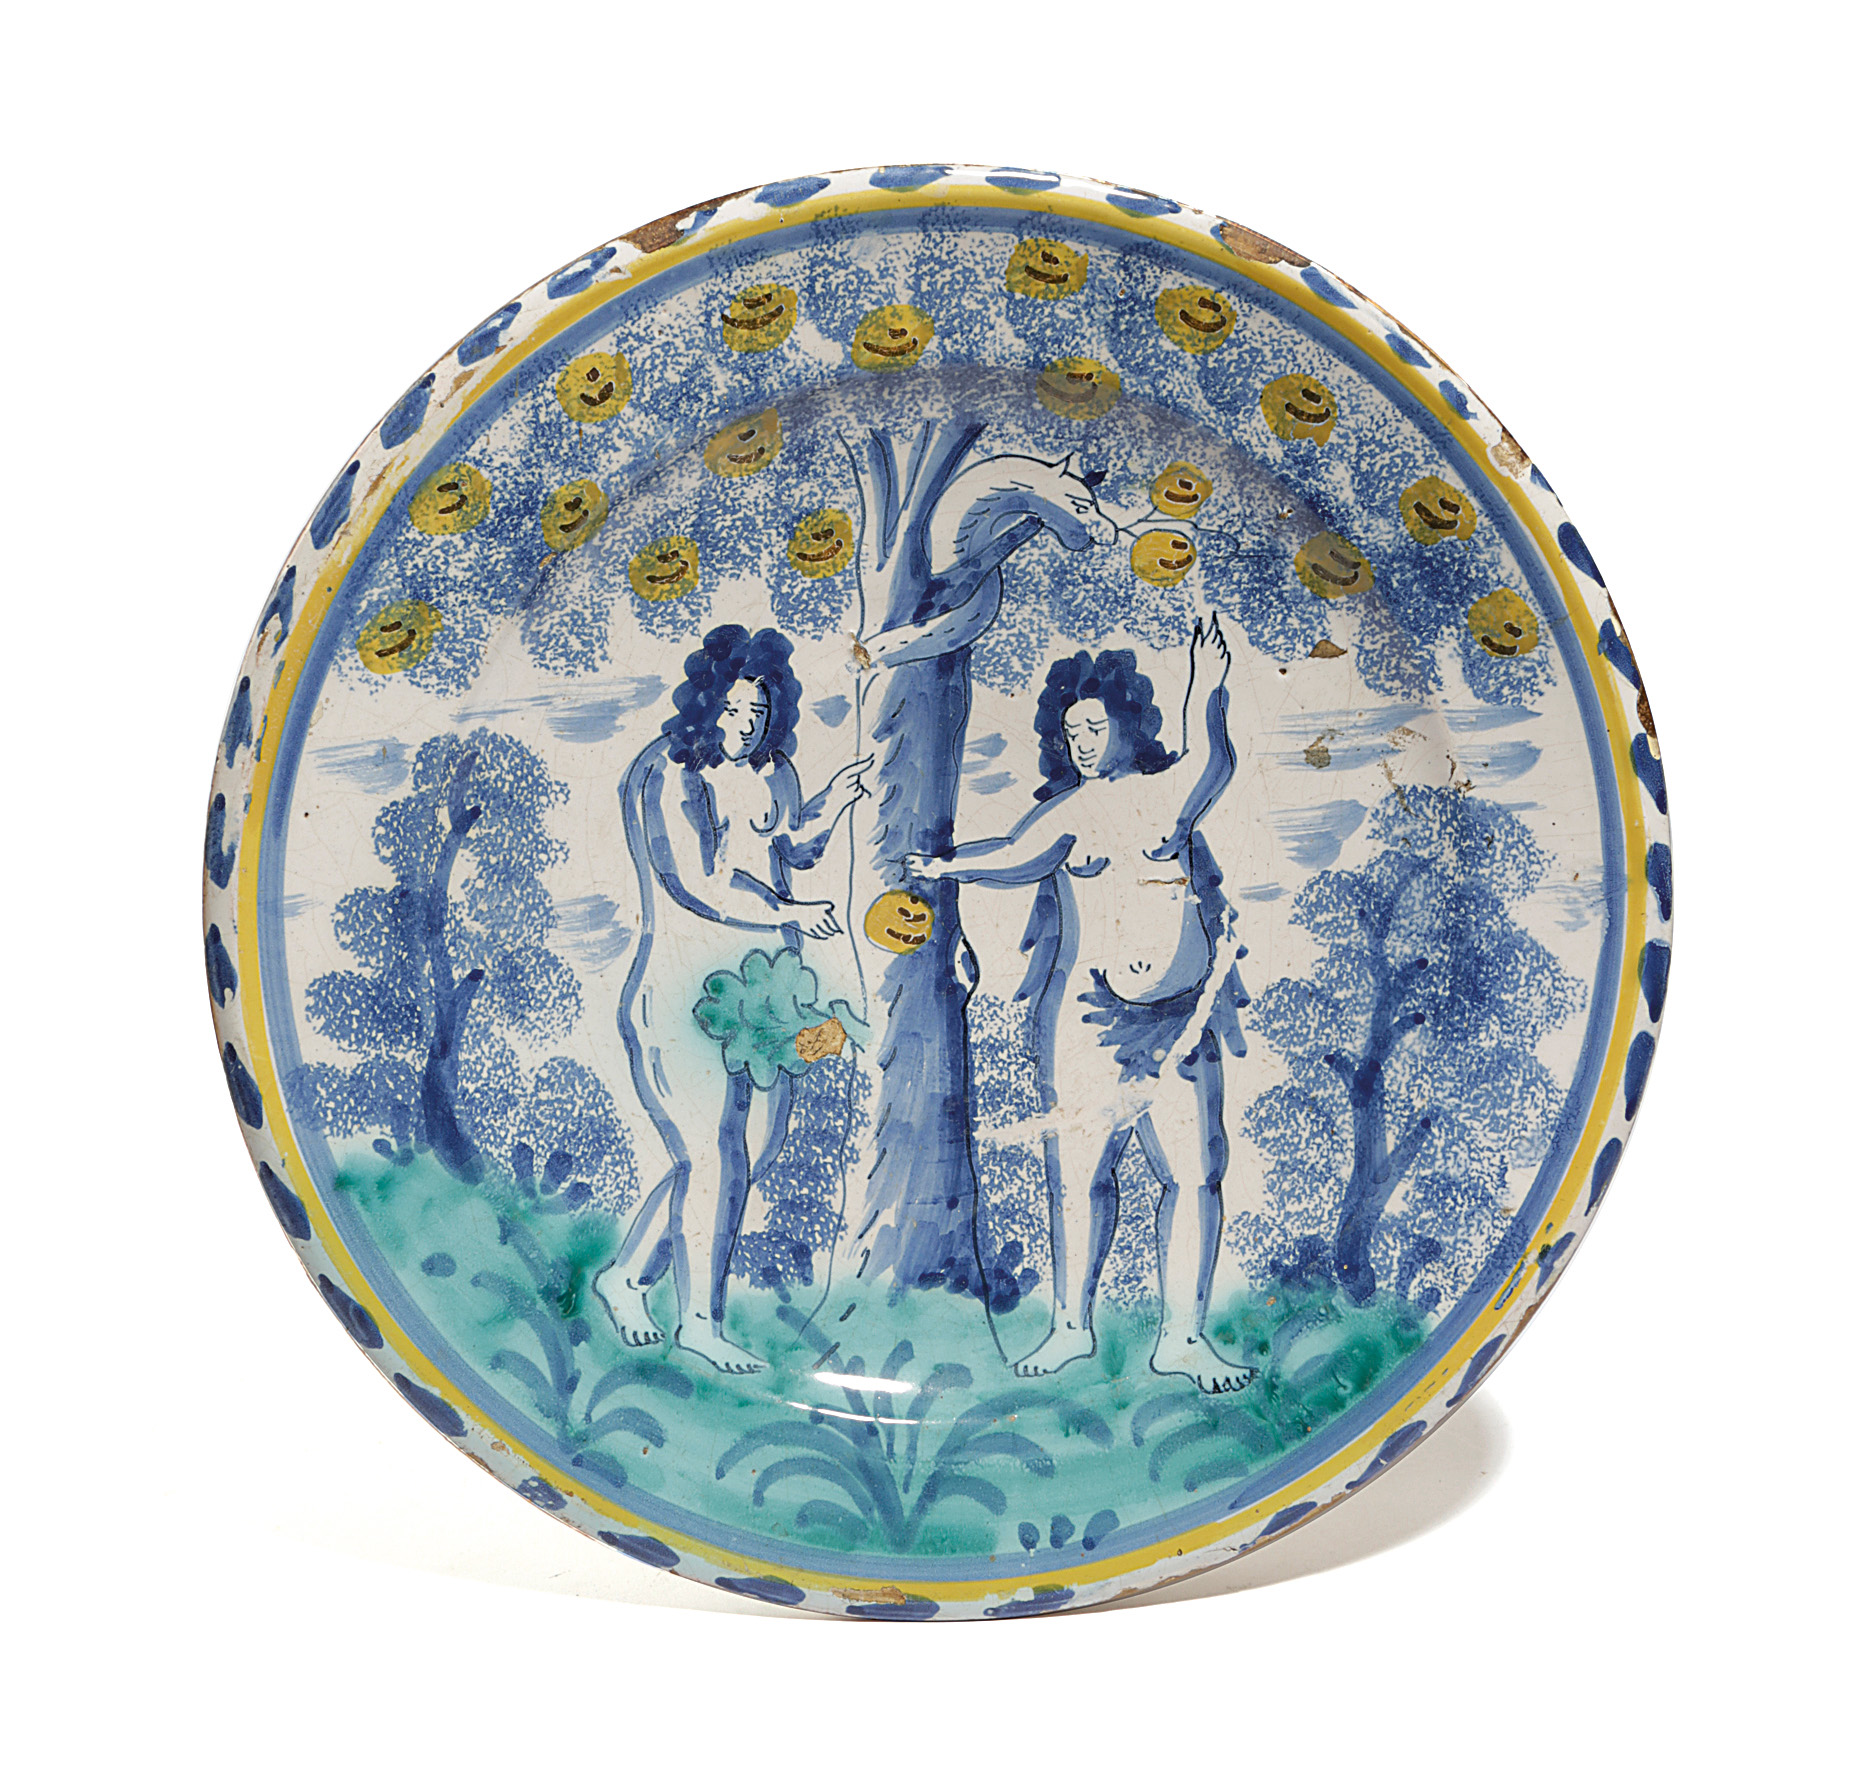 A LONDON DELFTWARE POTTERY ADAM AND EVE CHARGER ATTRIBUTED TO NORFOLK HOUSE, C.1720-30 painted in